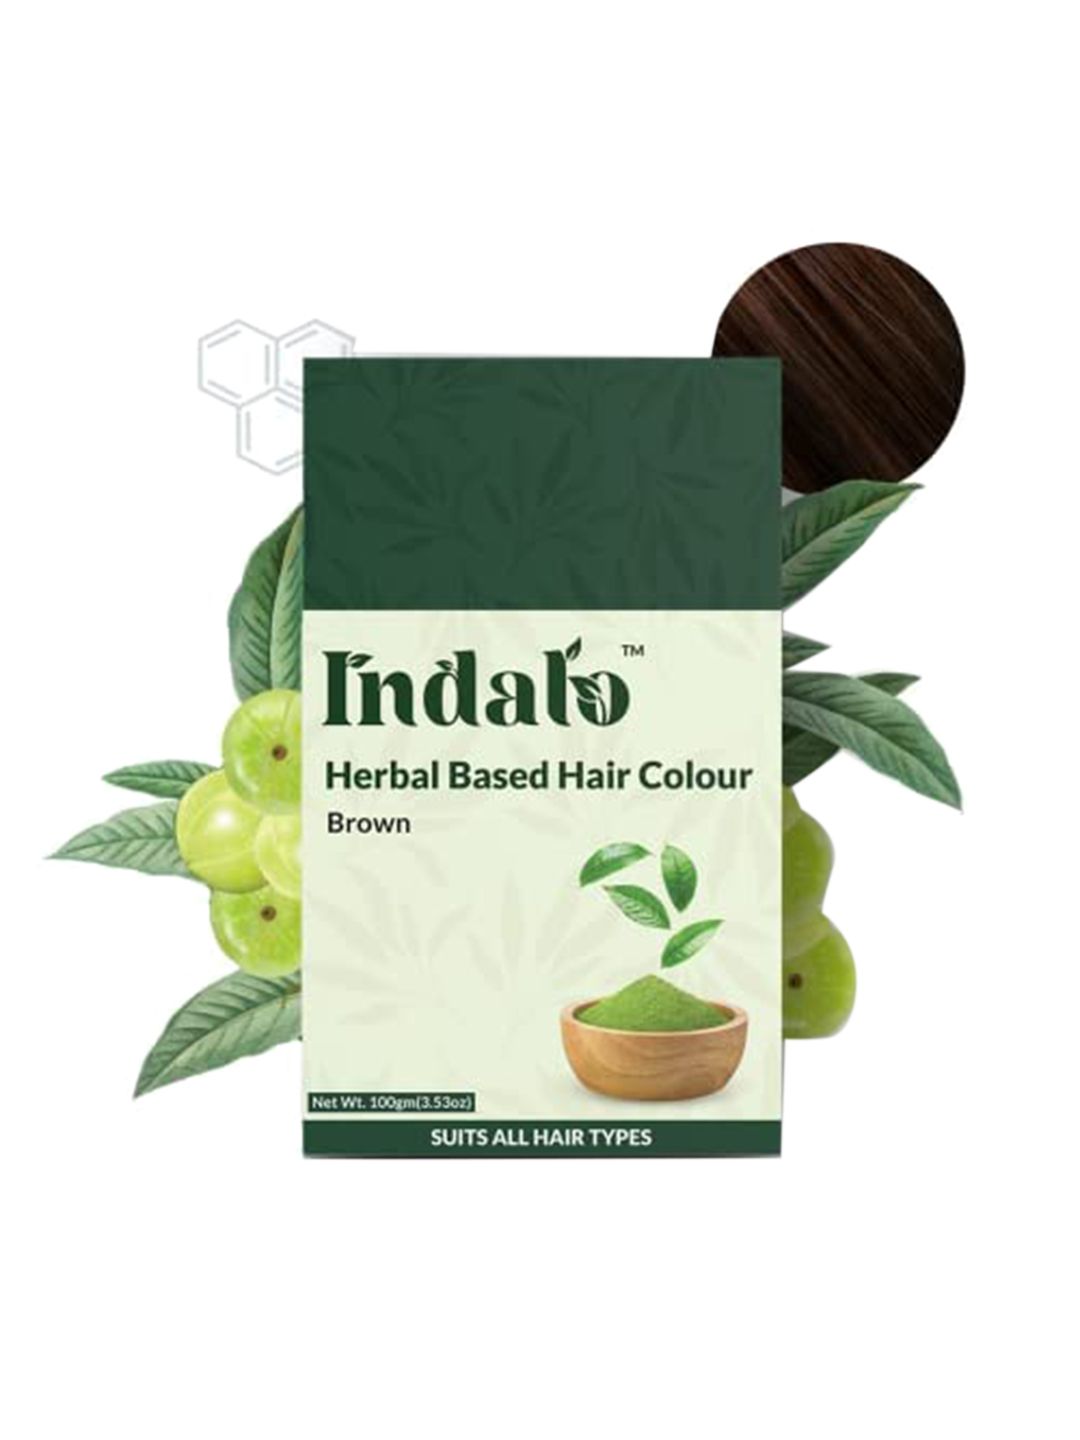 INDALO Long Lasting No Ammonia Herbal Based Hair Colour with Amla and Brahmi 100 g - Brown Price in India